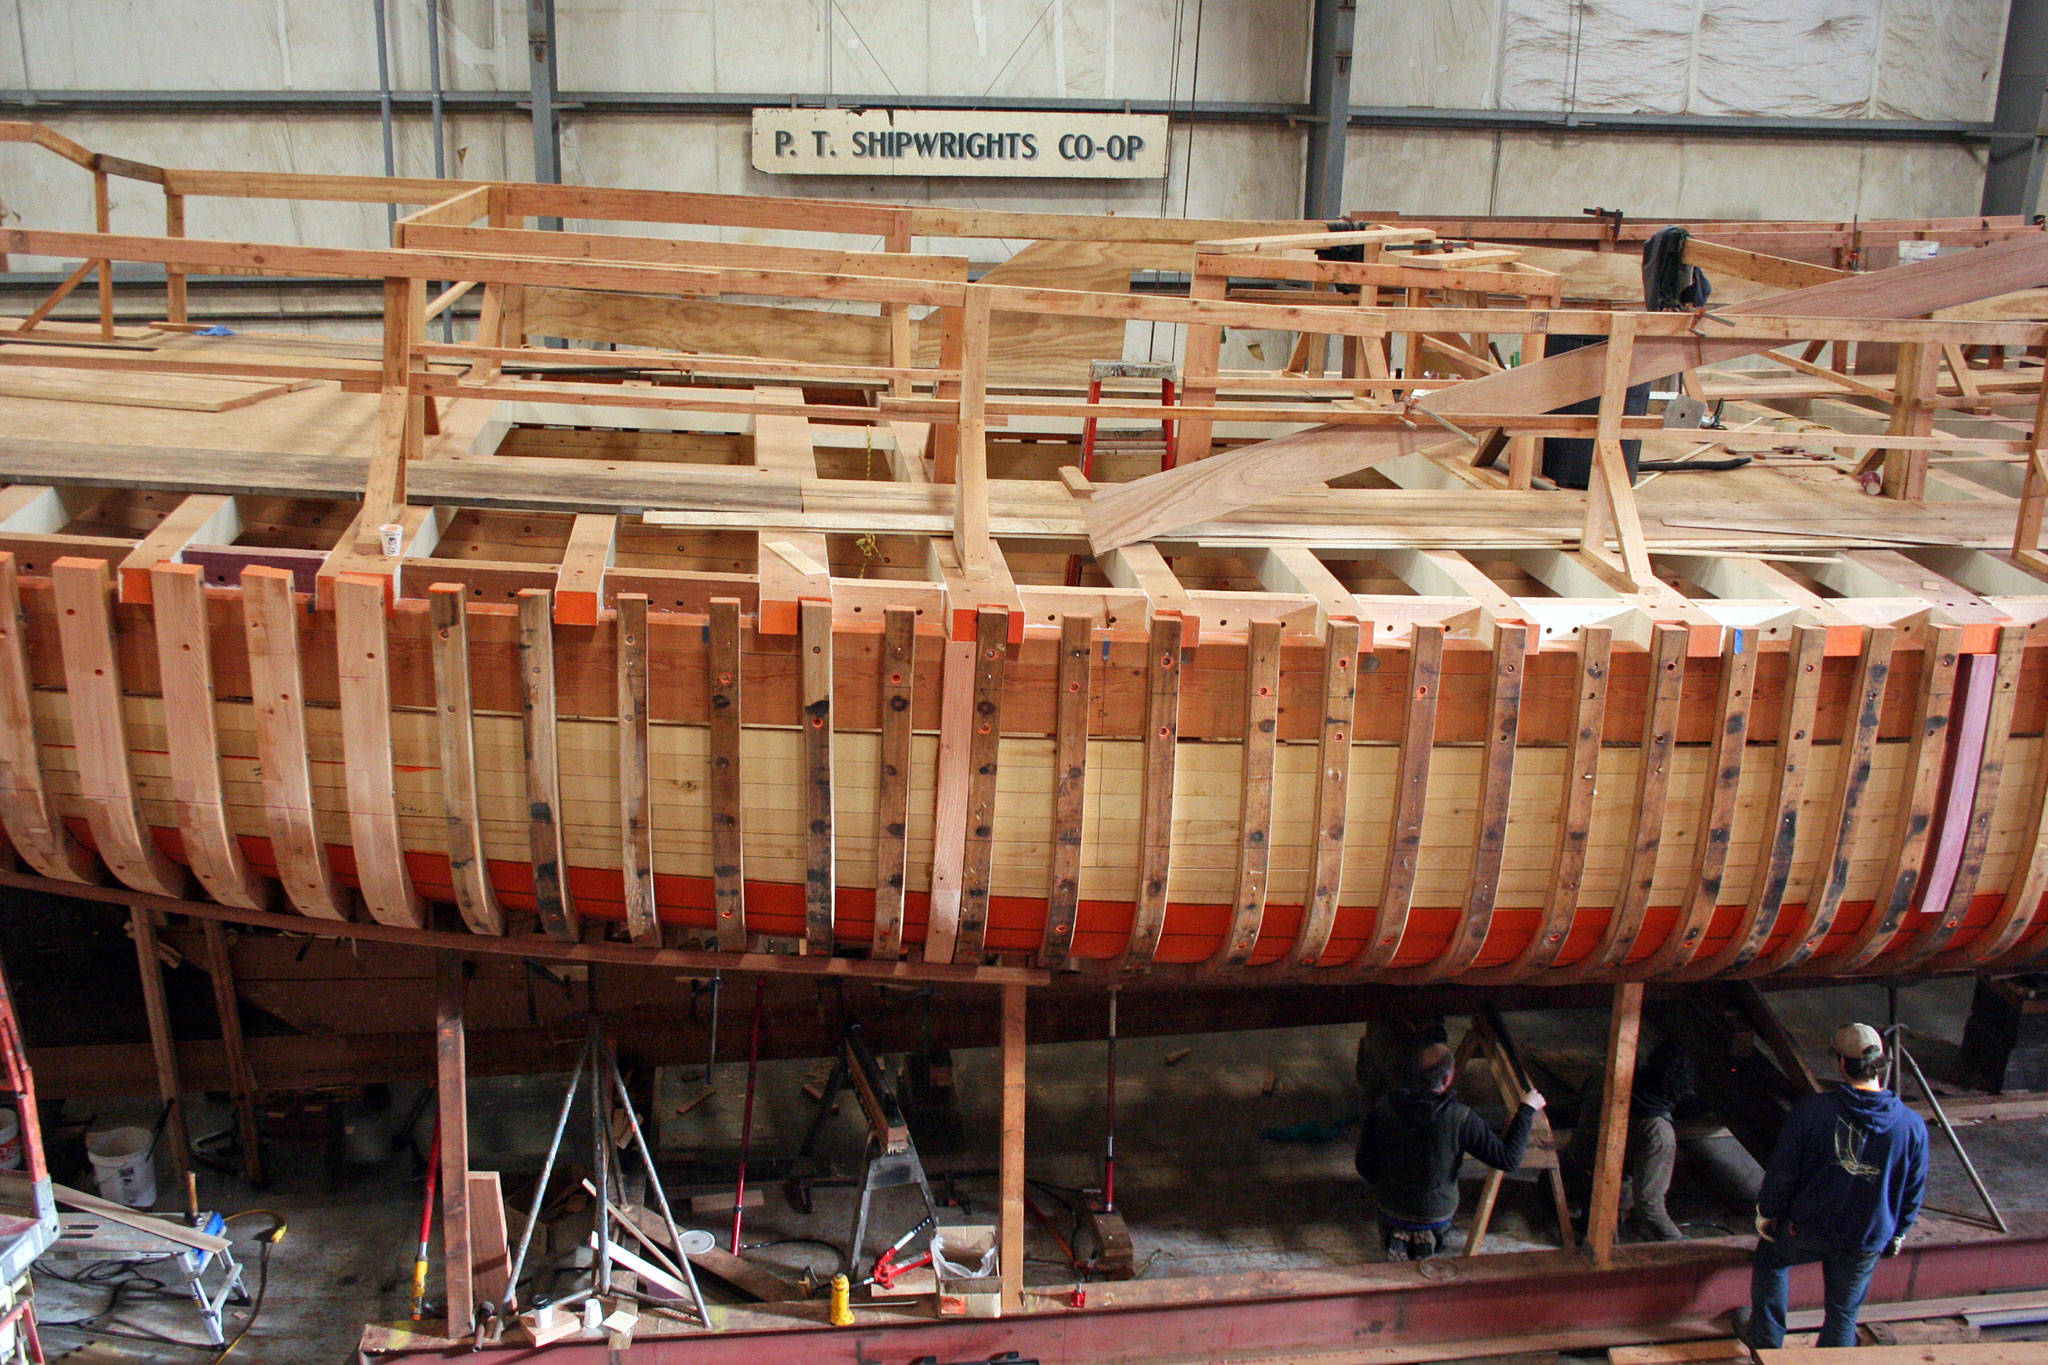 The Western Flyer, the fishing boat made famous by John Steinbeck and Ed Ricketts in the book “Sea of Cortez: A Leisurely Journal of Travel and Research,” is being restored inside the Port Townsend Shipwright’s Co-op building. (Brian McLean/Peninsula Daily News)